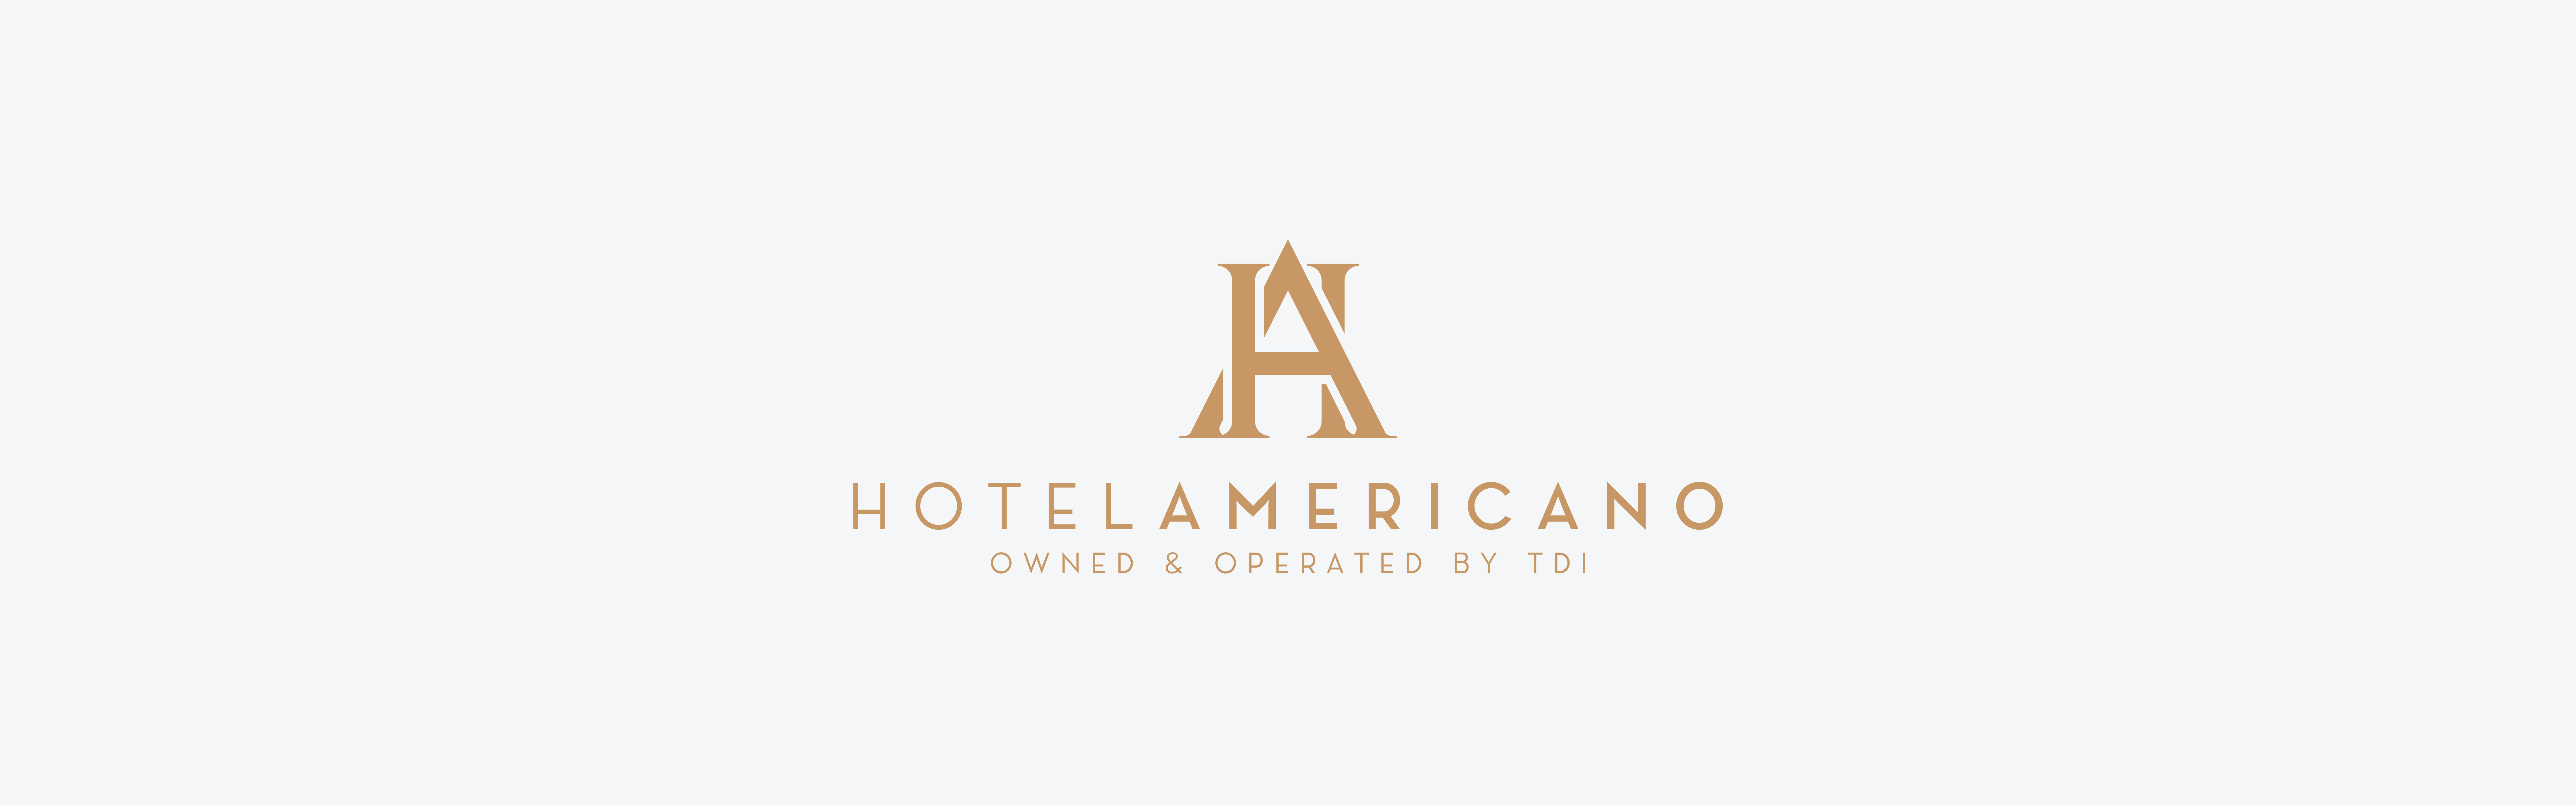 The image displays a logo for "Hotel Americano," which is indicated to be owned and operated by TDI. The logo features a stylized letter "A" suggestive of a building or structure.